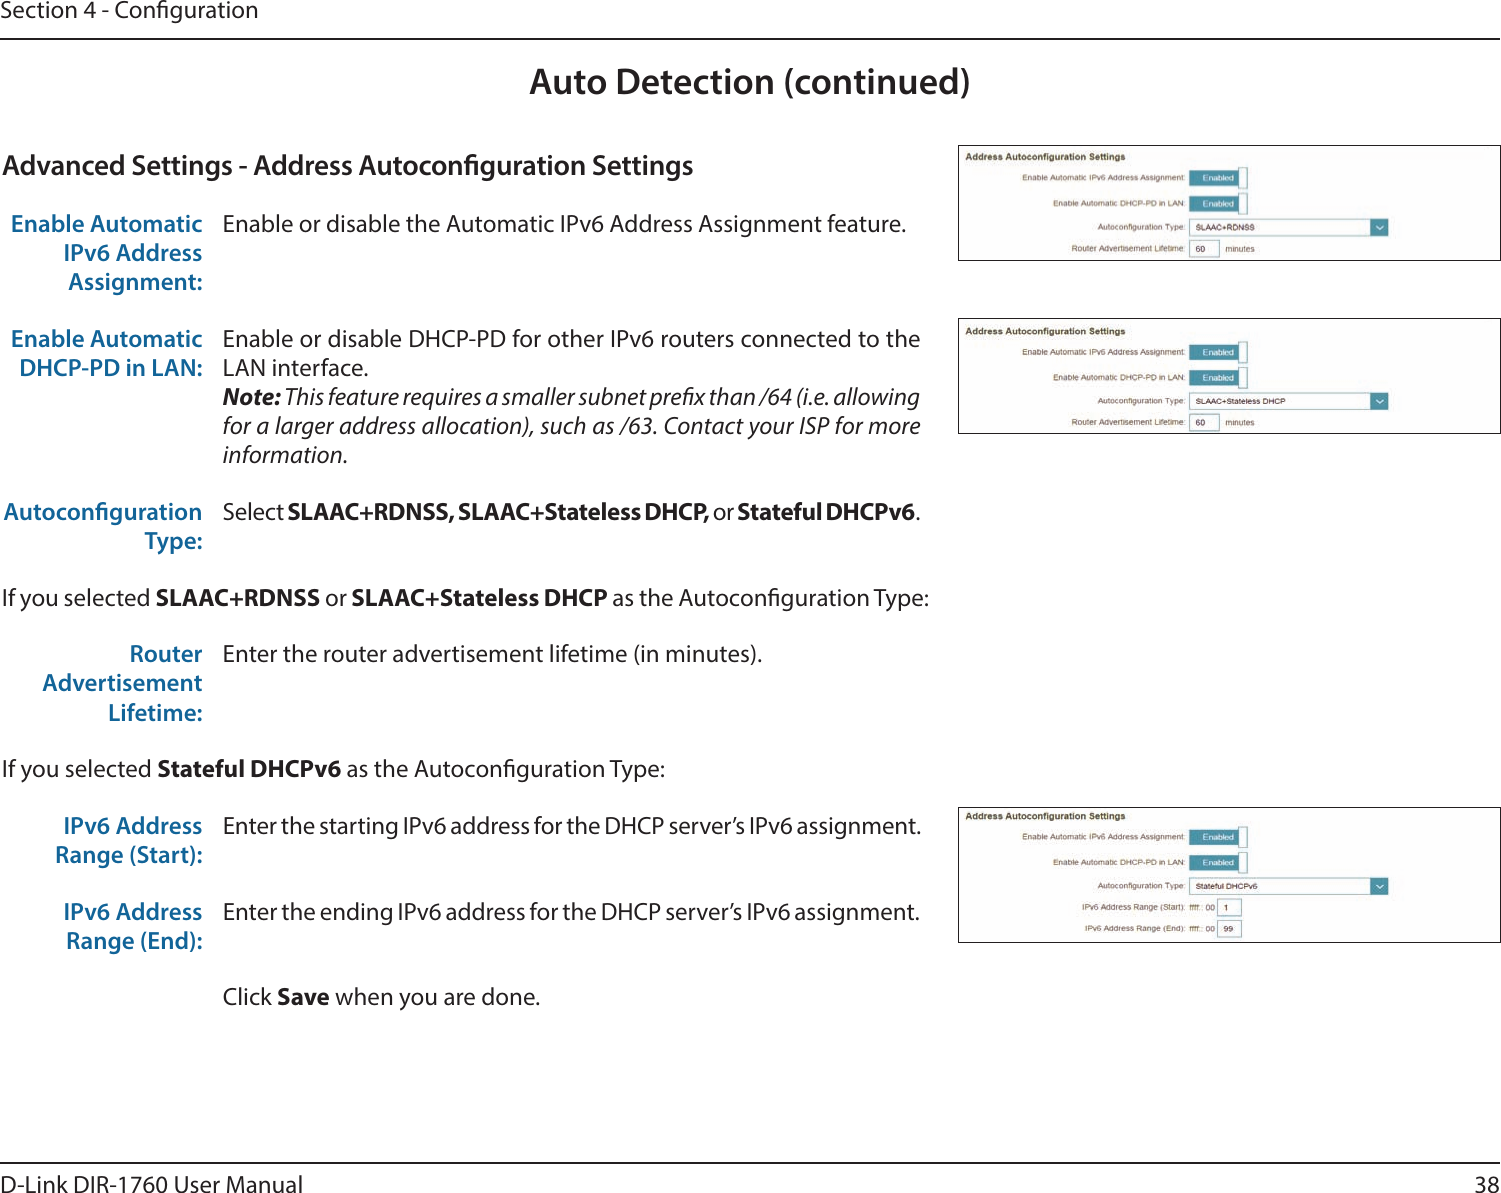 38D-Link DIR-1760 User ManualSection 4 - CongurationAuto Detection (continued)Advanced Settings - Address Autoconguration SettingsEnable Automatic IPv6 Address Assignment:Enable or disable the Automatic IPv6 Address Assignment feature.Enable Automatic DHCP-PD in LAN:Enable or disable DHCP-PD for other IPv6 routers connected to the LAN interface.Note: This feature requires a smaller subnet prex than /64 (i.e. allowing for a larger address allocation), such as /63. Contact your ISP for more information.Autoconguration Type:Select SLAAC+RDNSS, SLAAC+Stateless DHCP, or Stateful DHCPv6.If you selected SLAAC+RDNSS or SLAAC+Stateless DHCP as the Autoconguration Type:Router Advertisement Lifetime:Enter the router advertisement lifetime (in minutes).If you selected Stateful DHCPv6 as the Autoconguration Type:IPv6 Address Range (Start):Enter the starting IPv6 address for the DHCP server’s IPv6 assignment.IPv6 Address Range (End):Enter the ending IPv6 address for the DHCP server’s IPv6 assignment.Click Save when you are done.